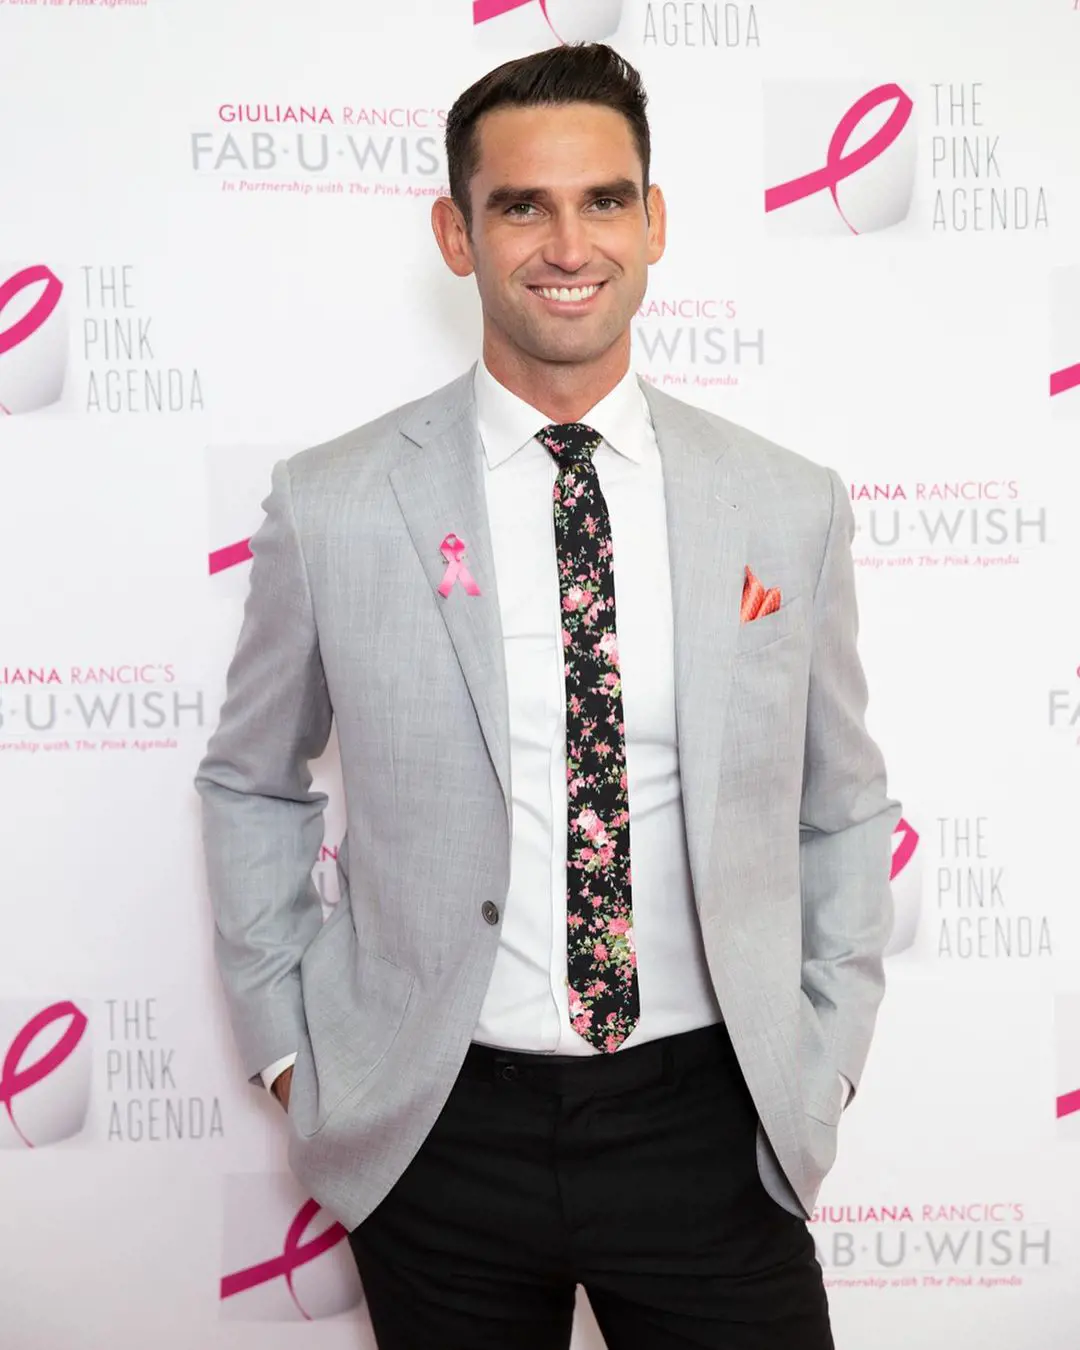 Carl at a gala for women cancer The Pink Agenda